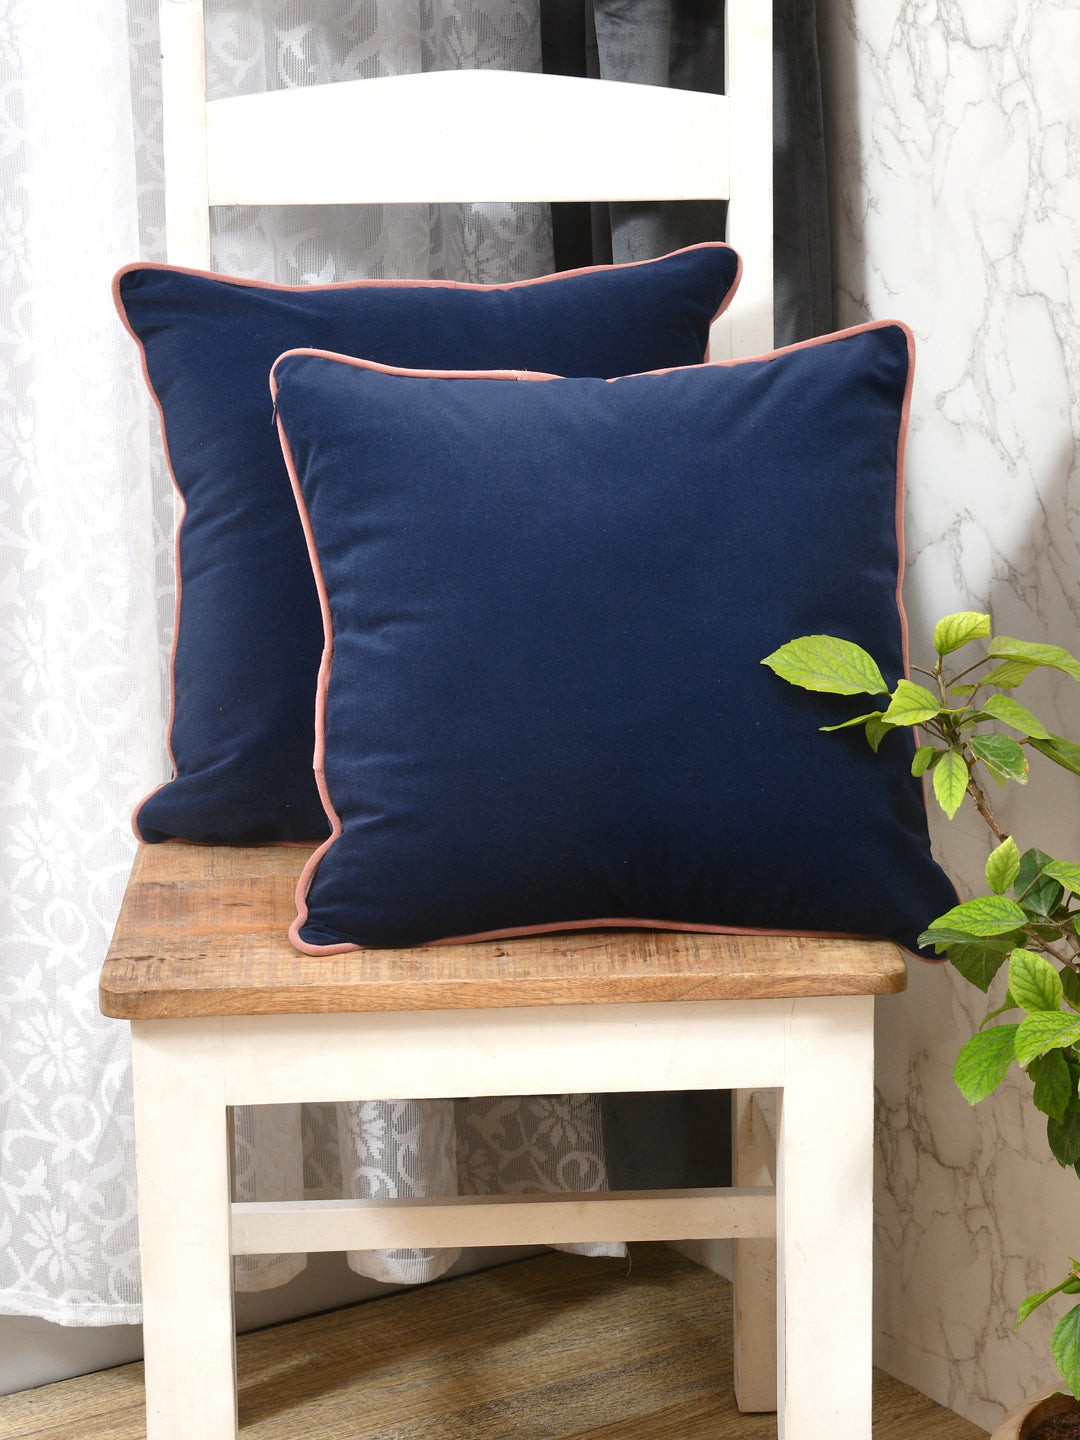 Velvet Cushion Covers; Set of 2; Blue With Pink Piping